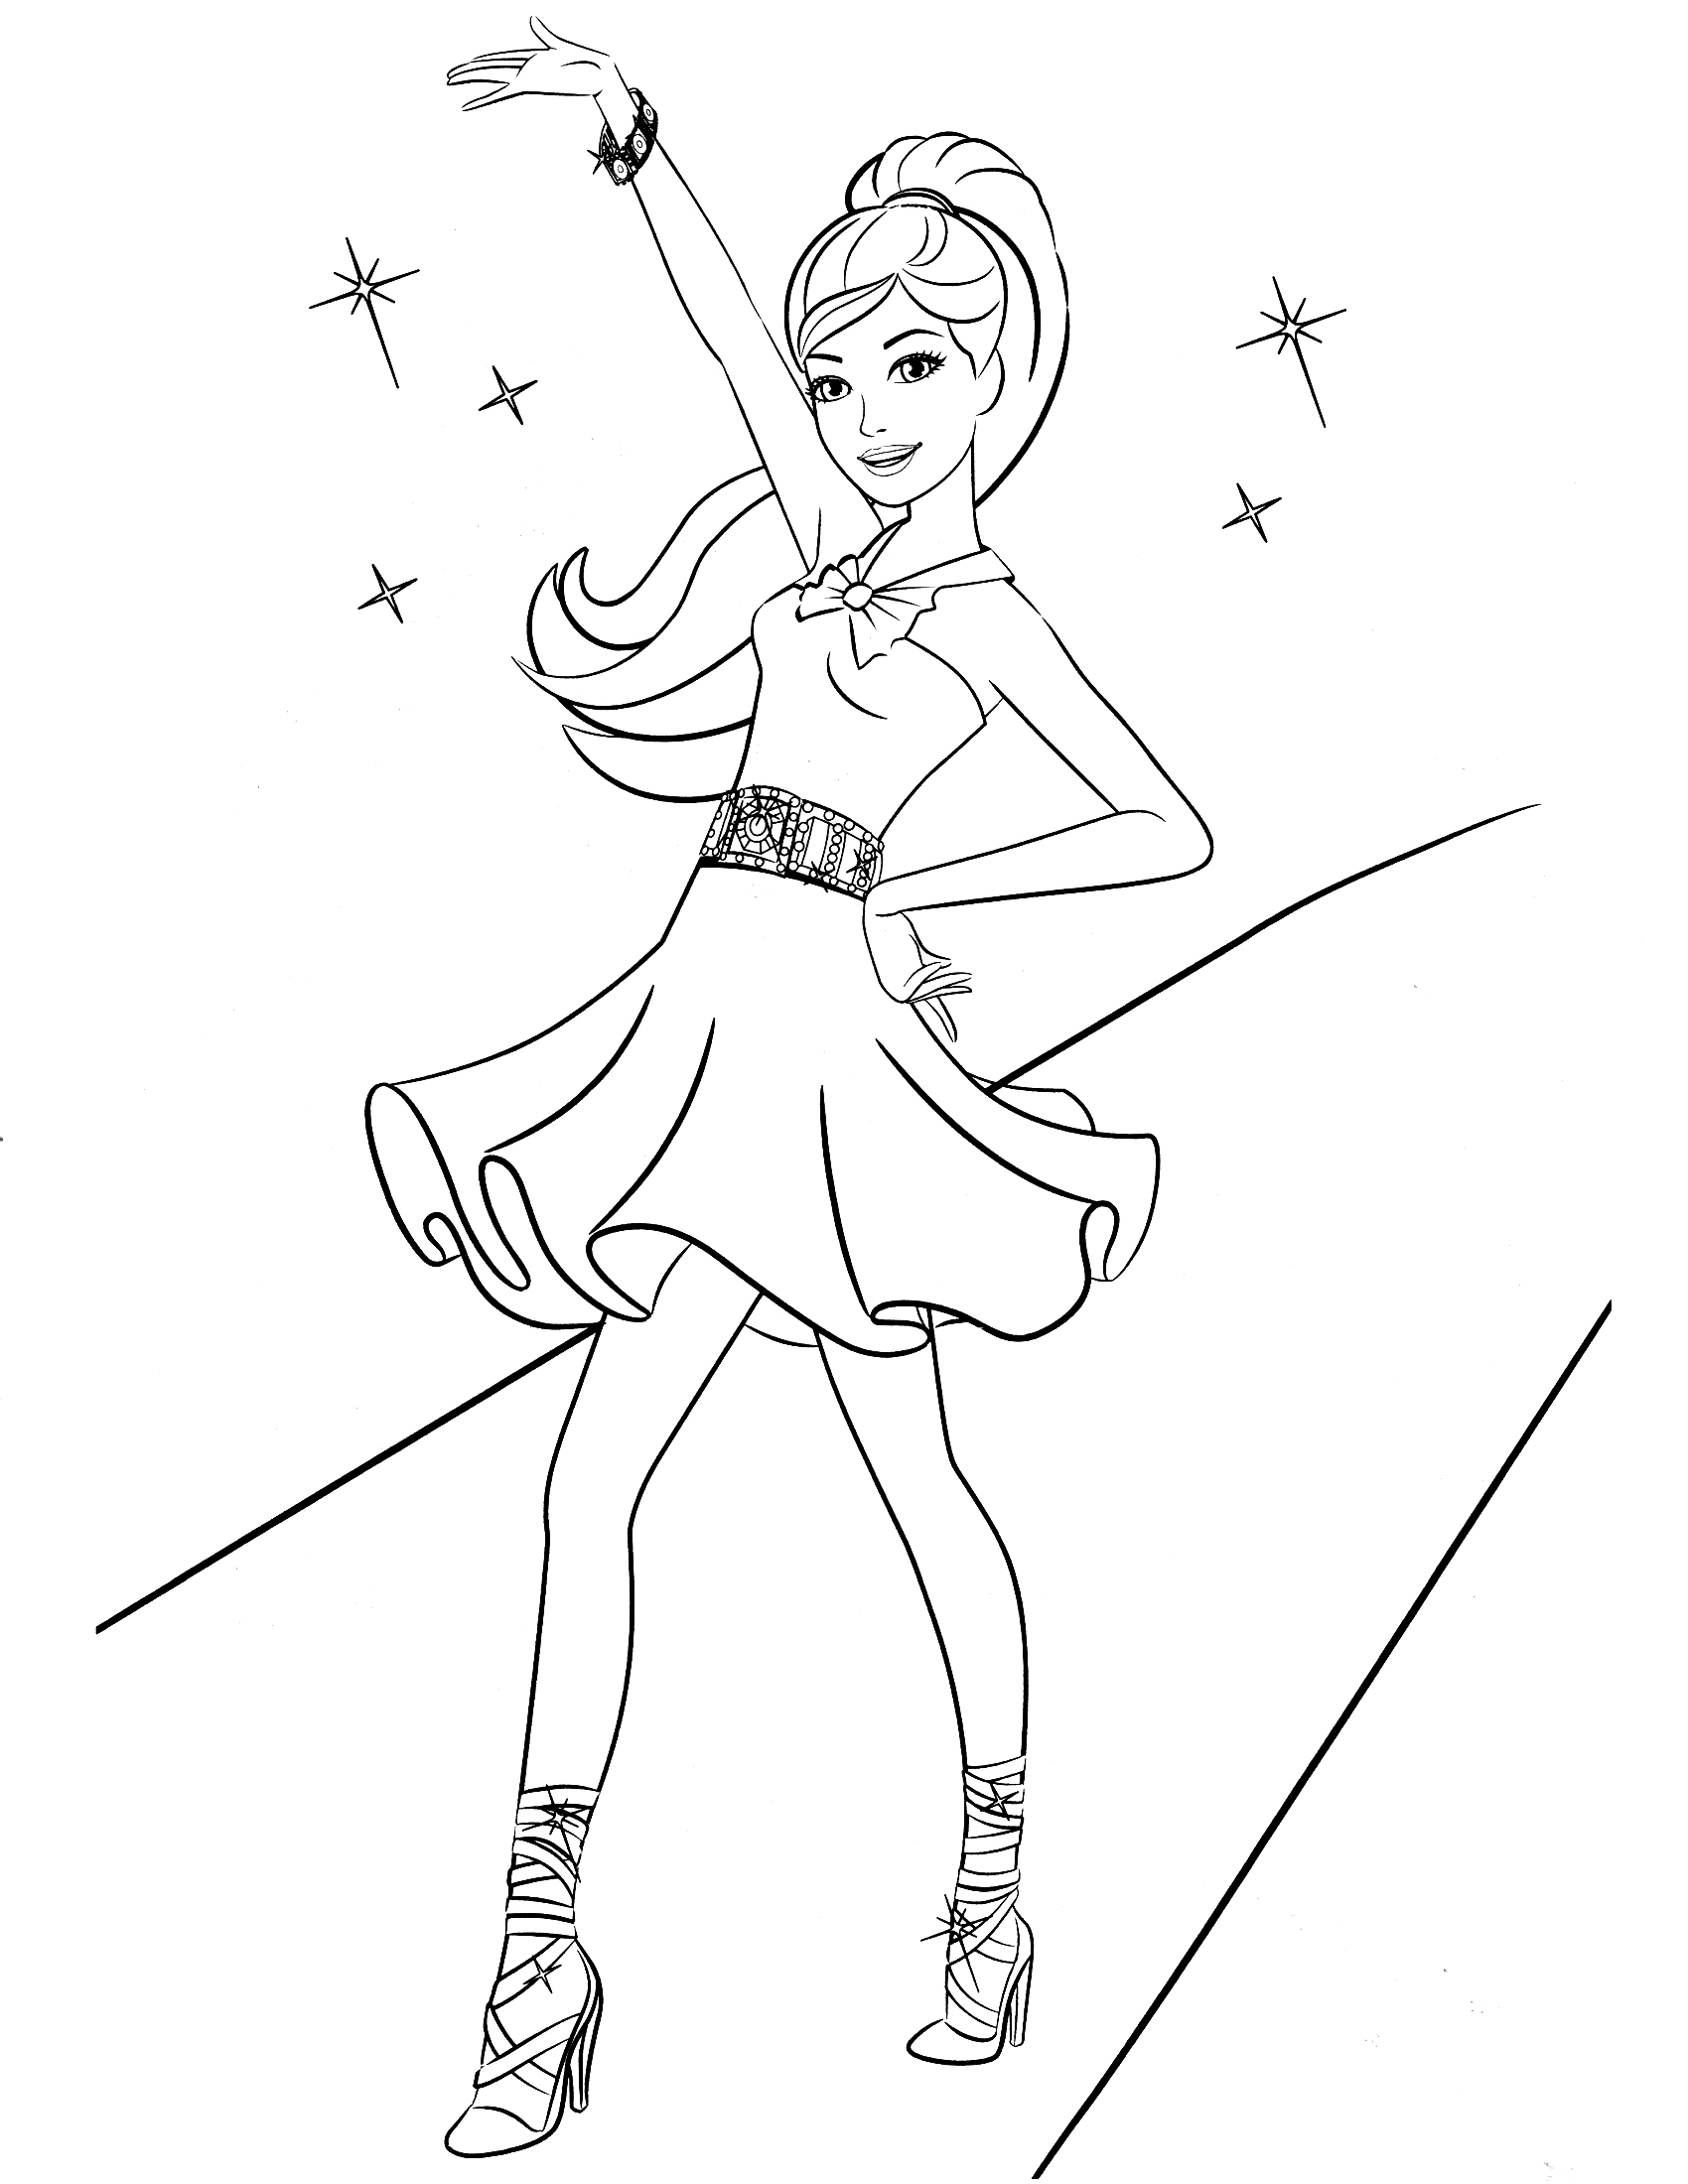 Coloring Pages : Barbie Coloring Sheets To Print For Adults Images - Free Printable Barbie Coloring Pages